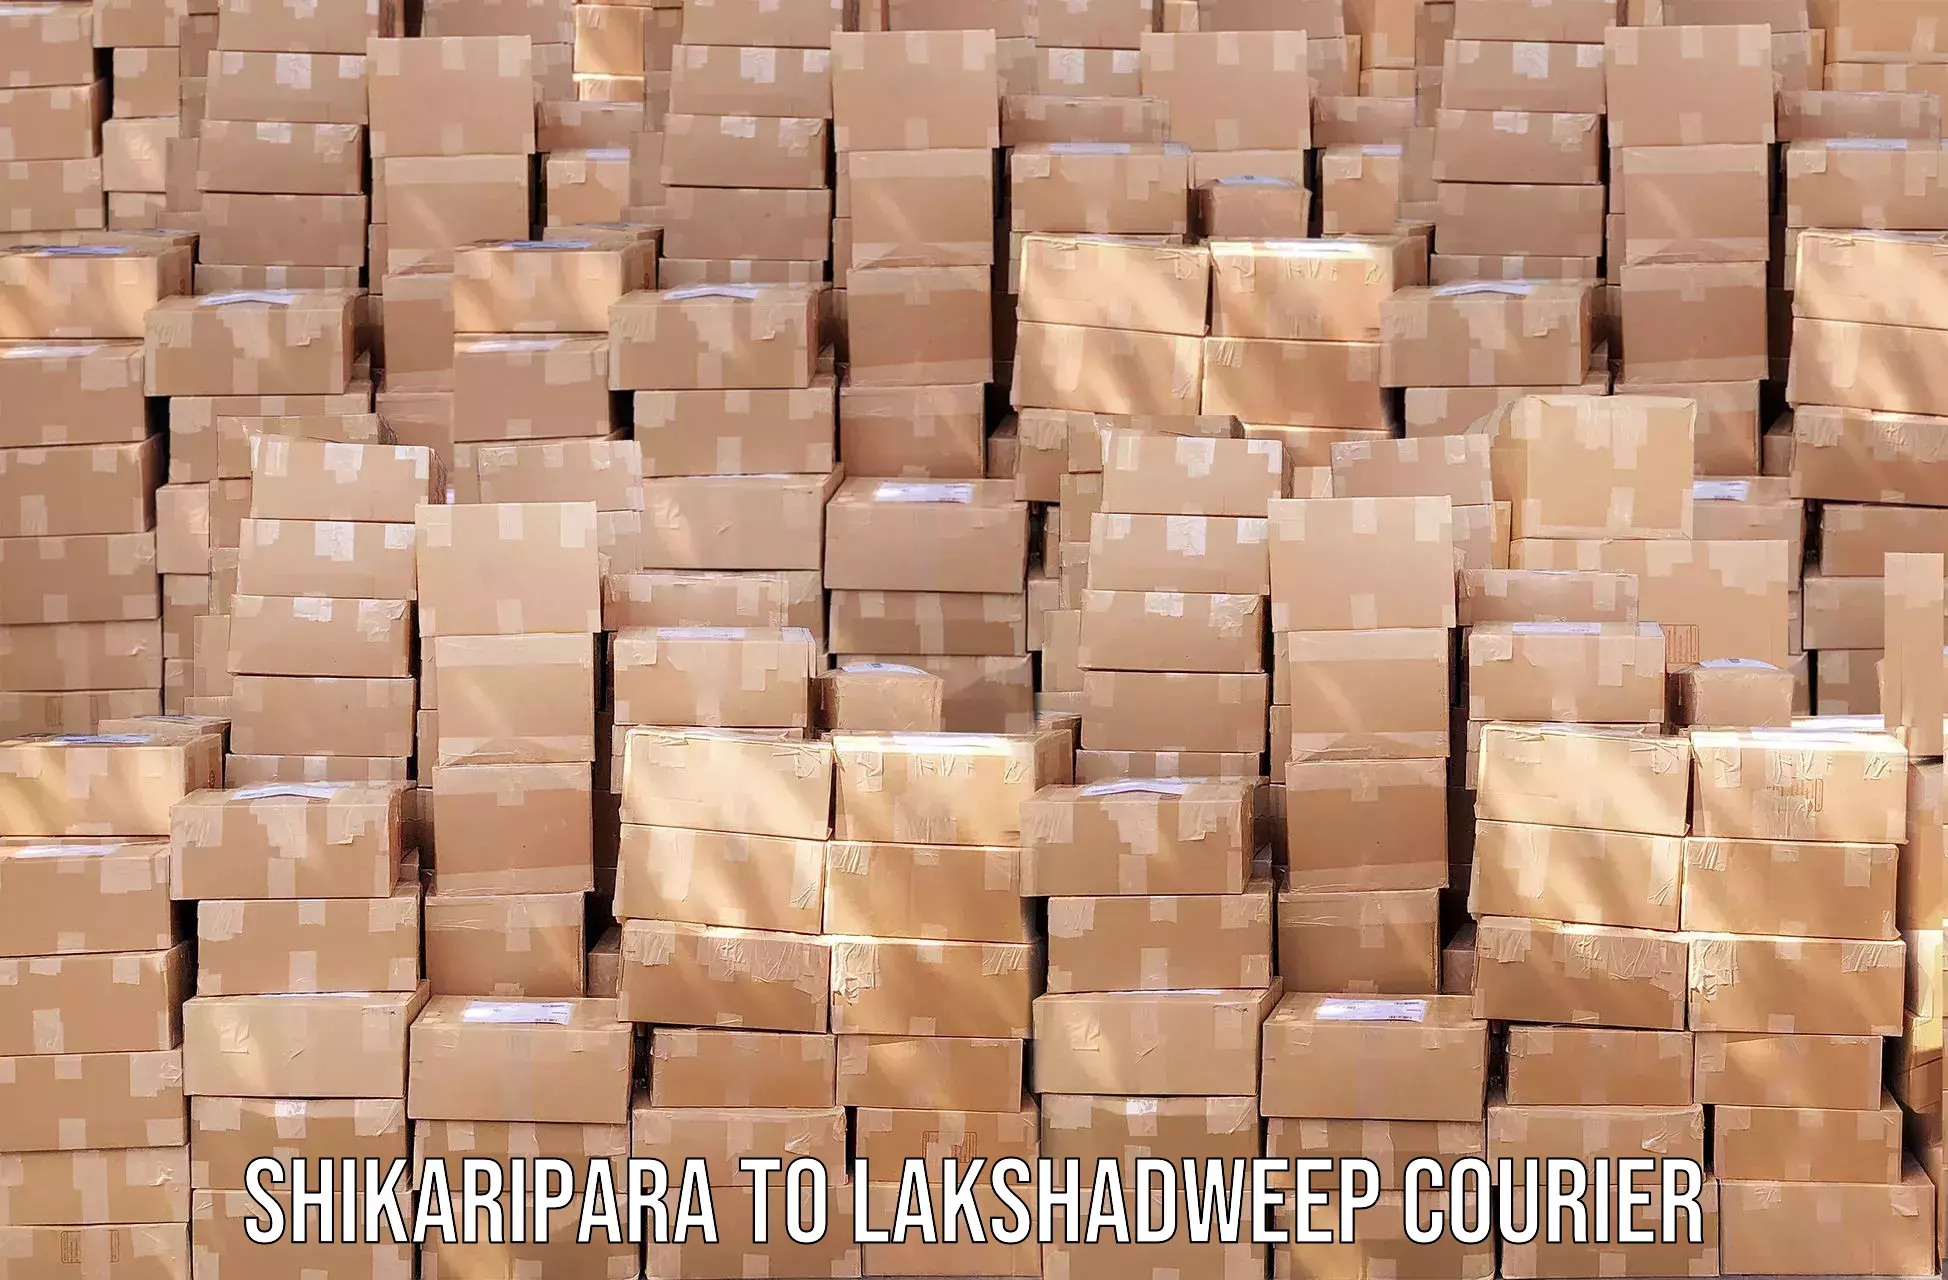 Personalized courier experiences Shikaripara to Lakshadweep